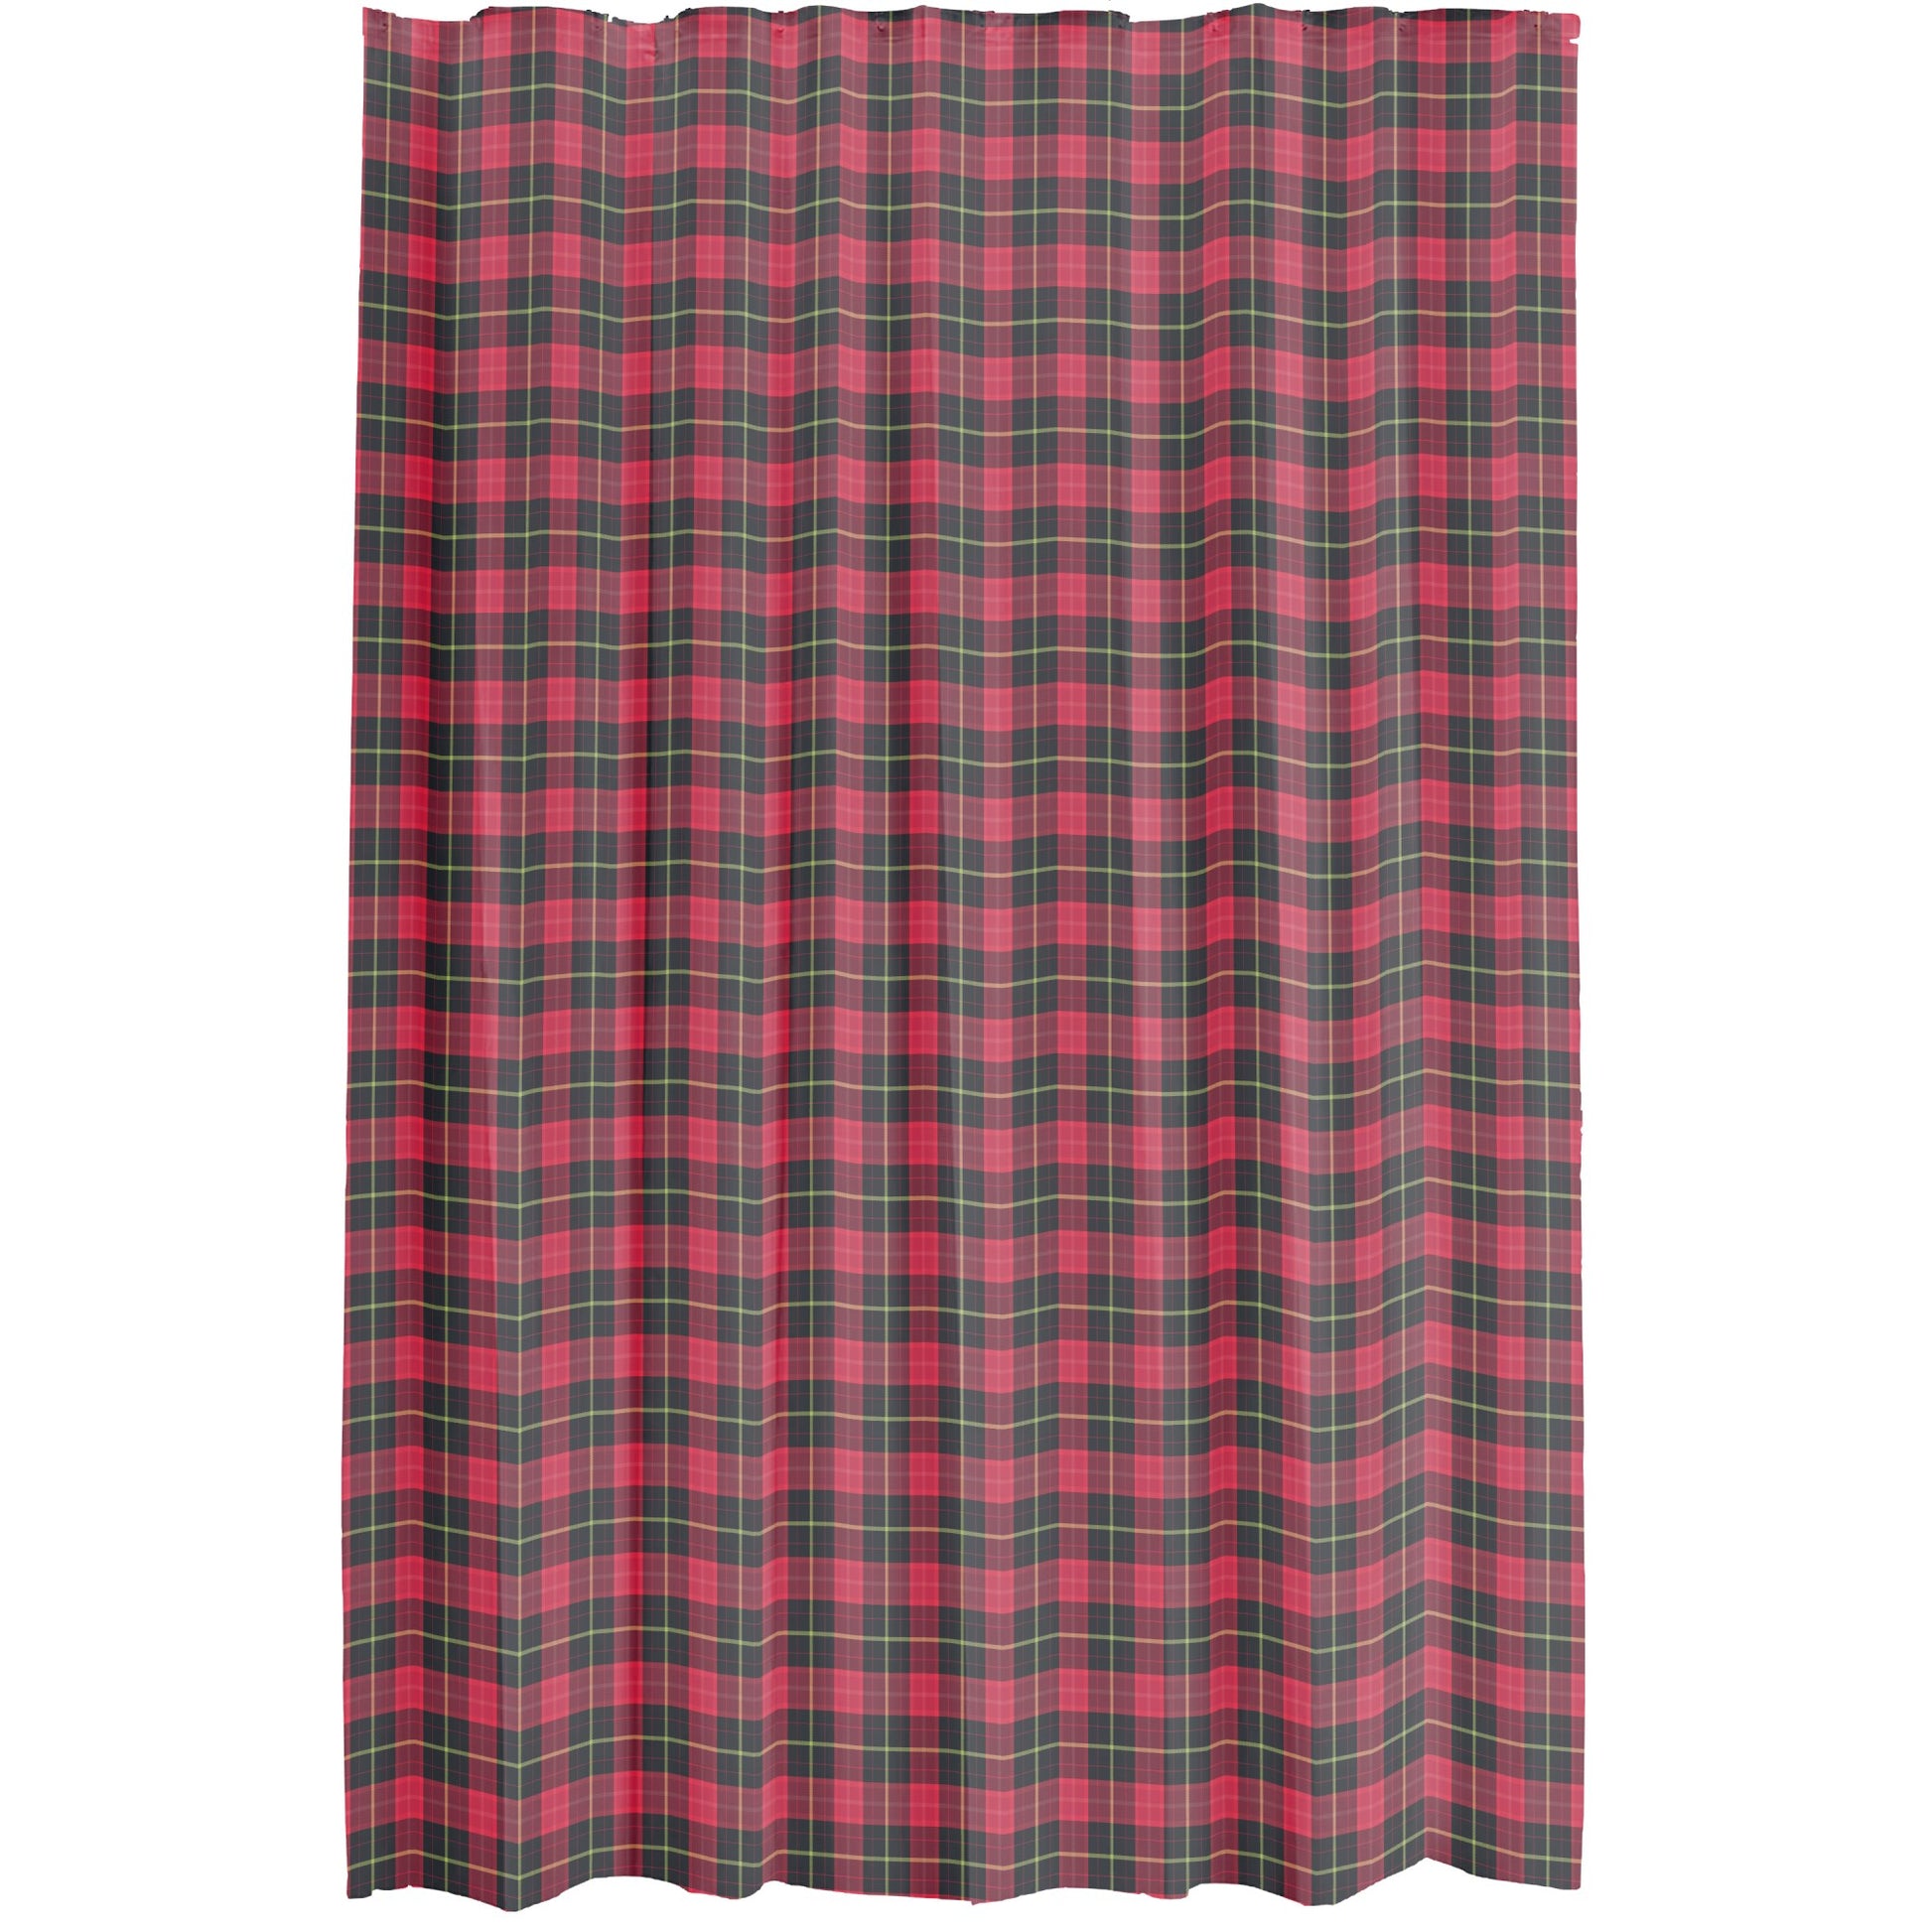 Red Plaid Shower Curtain - shades and stripes of green and red with gold or yellow mixed in